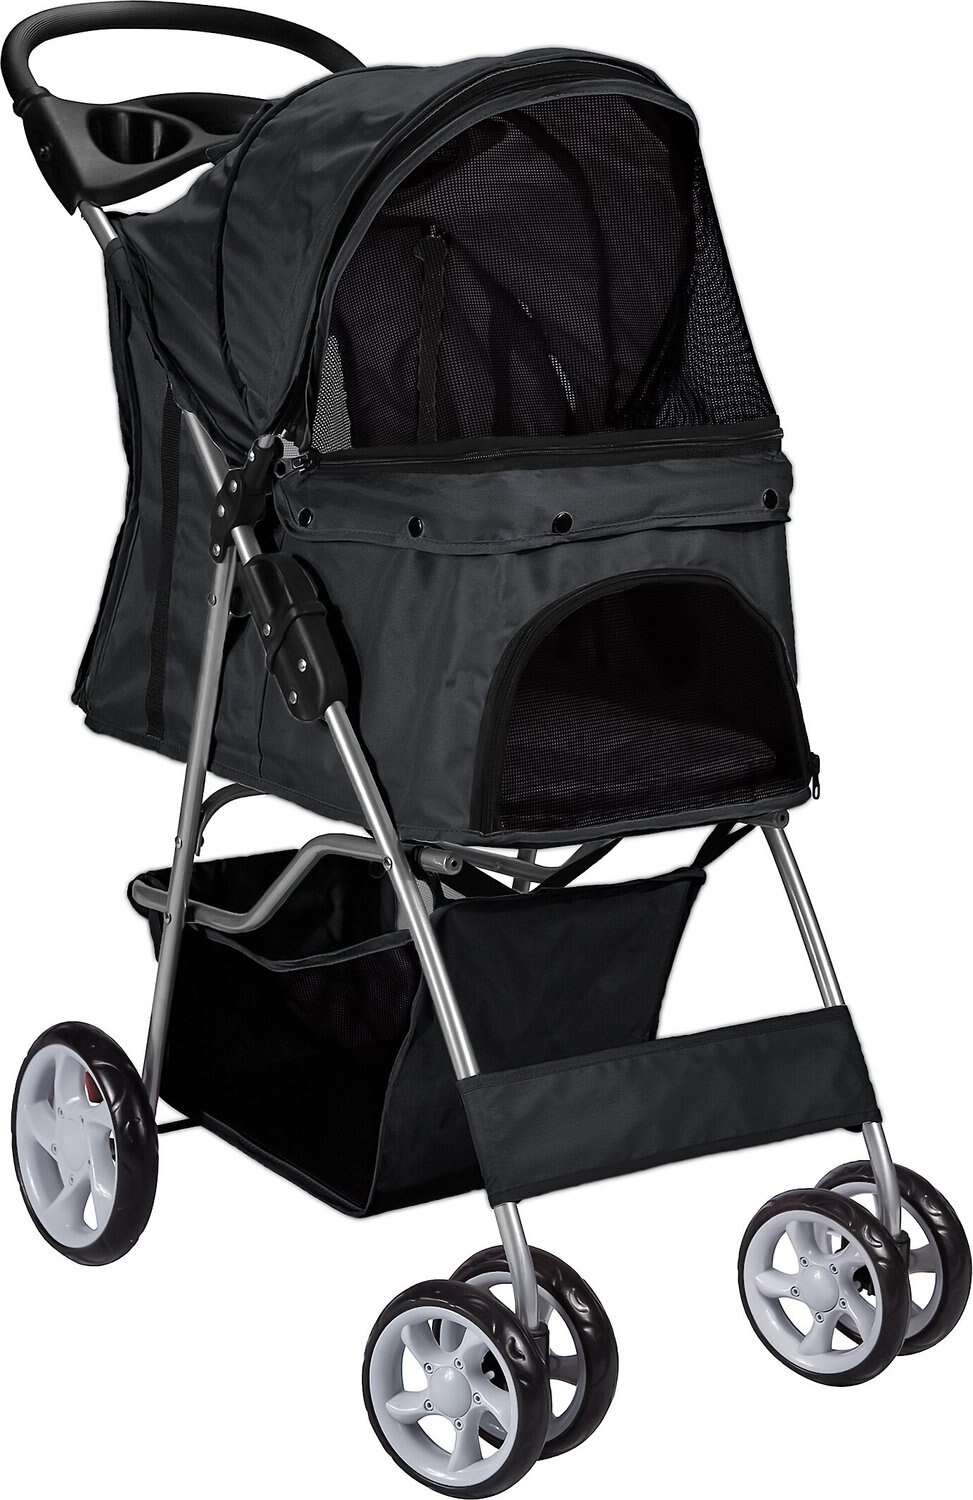 paws and pals deluxe folding stroller